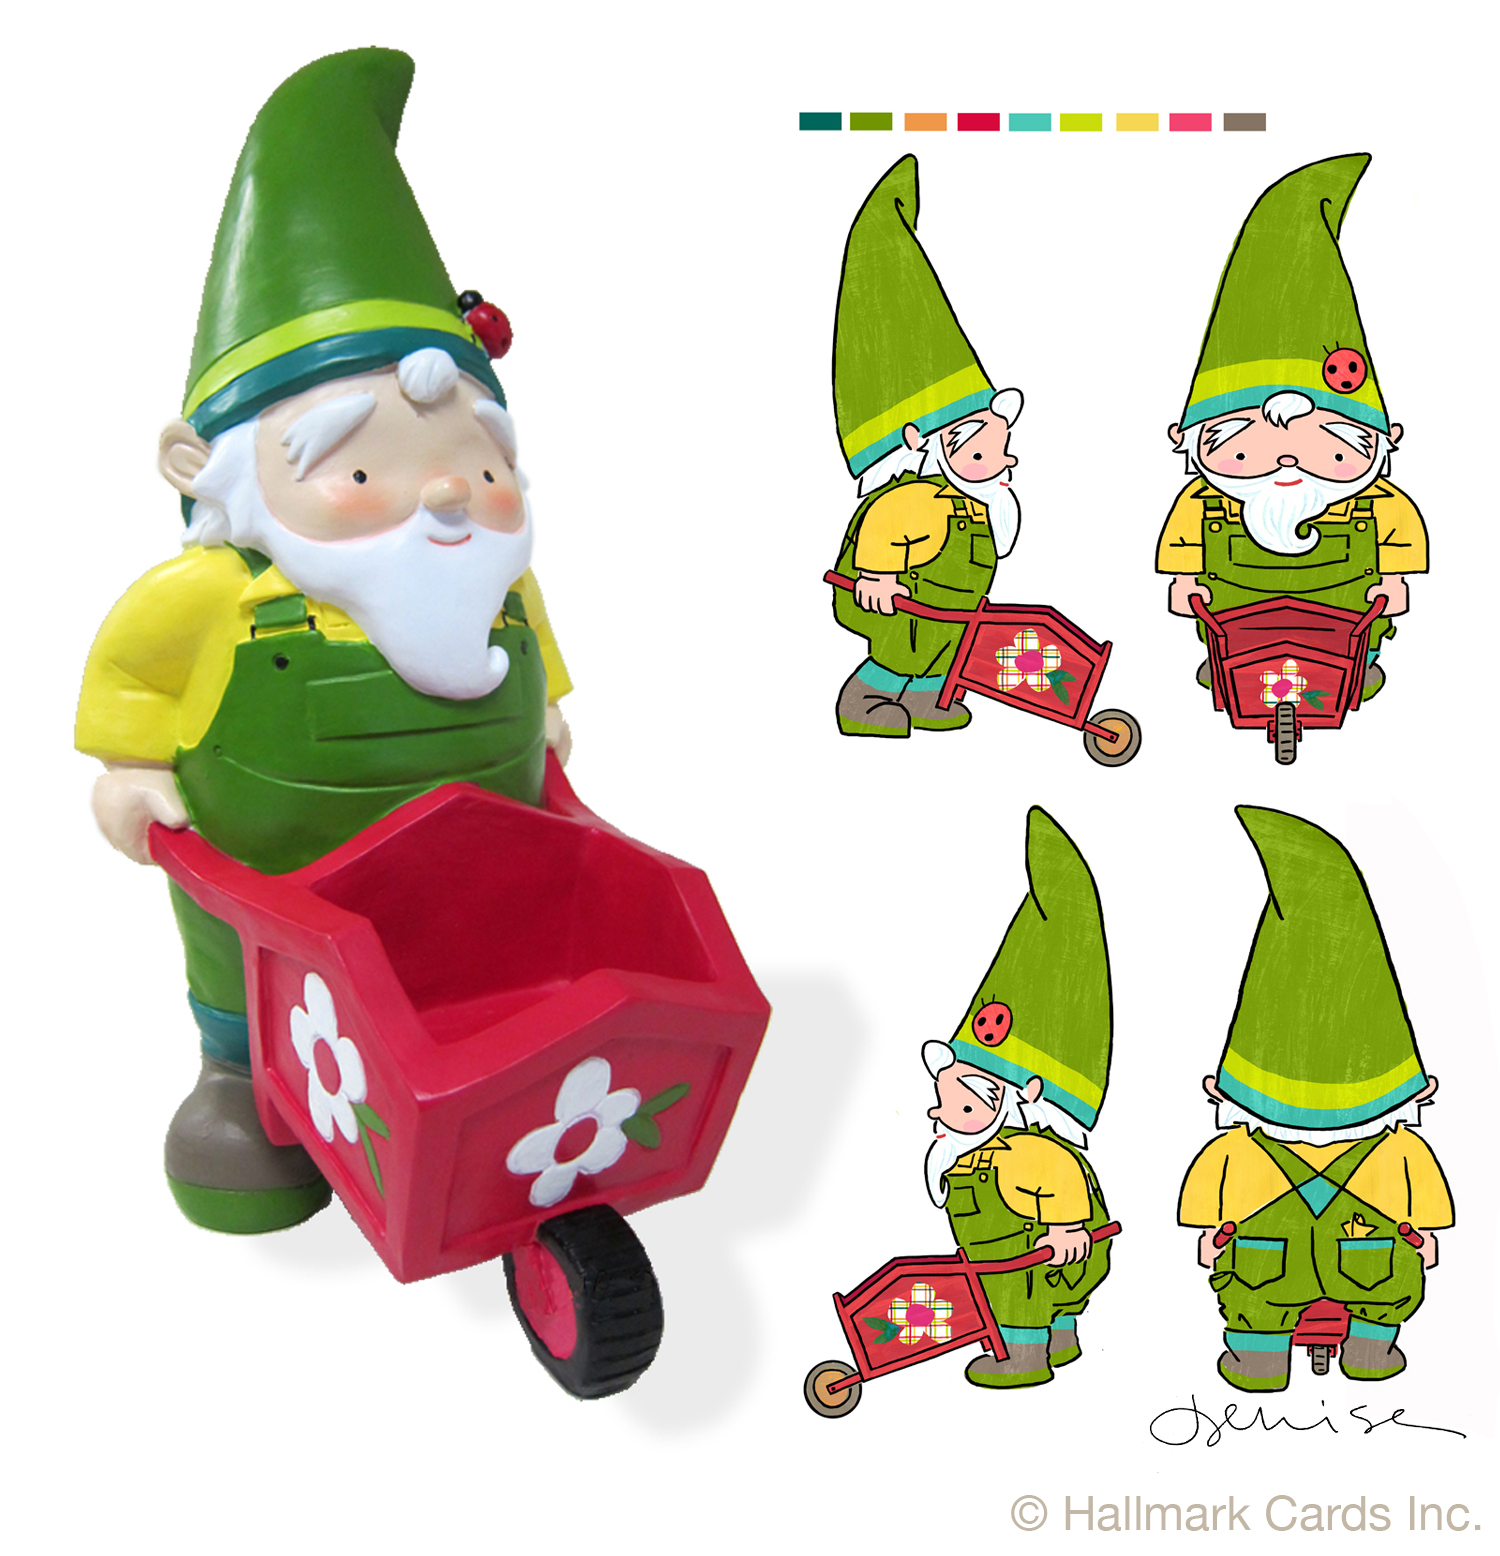 Garden Gnome drawing and sample.jpg